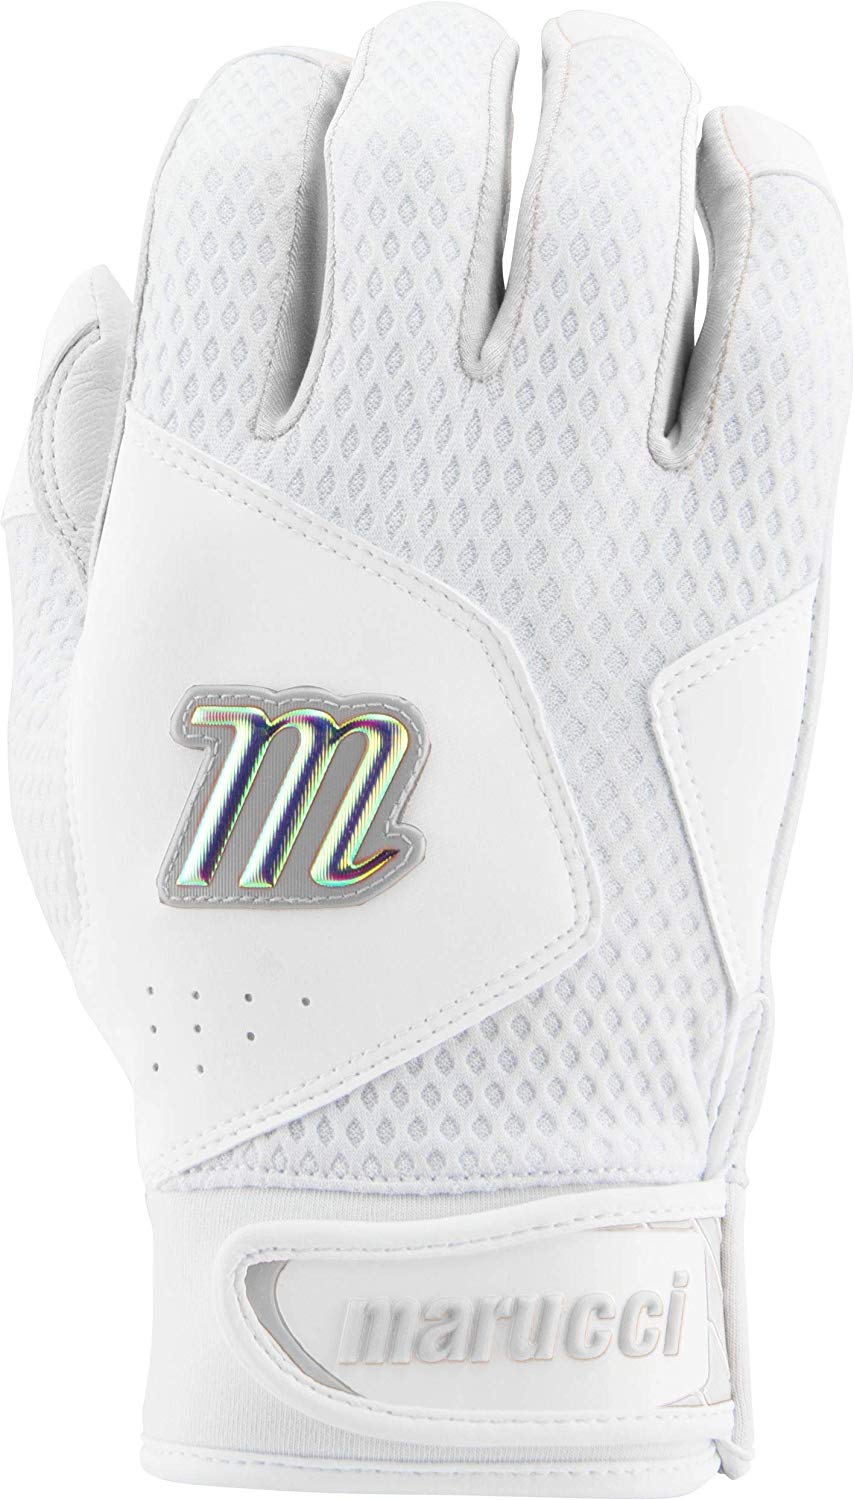 marucci-quest-2-0-adult-large-batting-gloves-white MBGQST2-WW-AL Marucci 849817085431 Durable genuine leather palm Dimpled mesh back Neoprene cuff.  